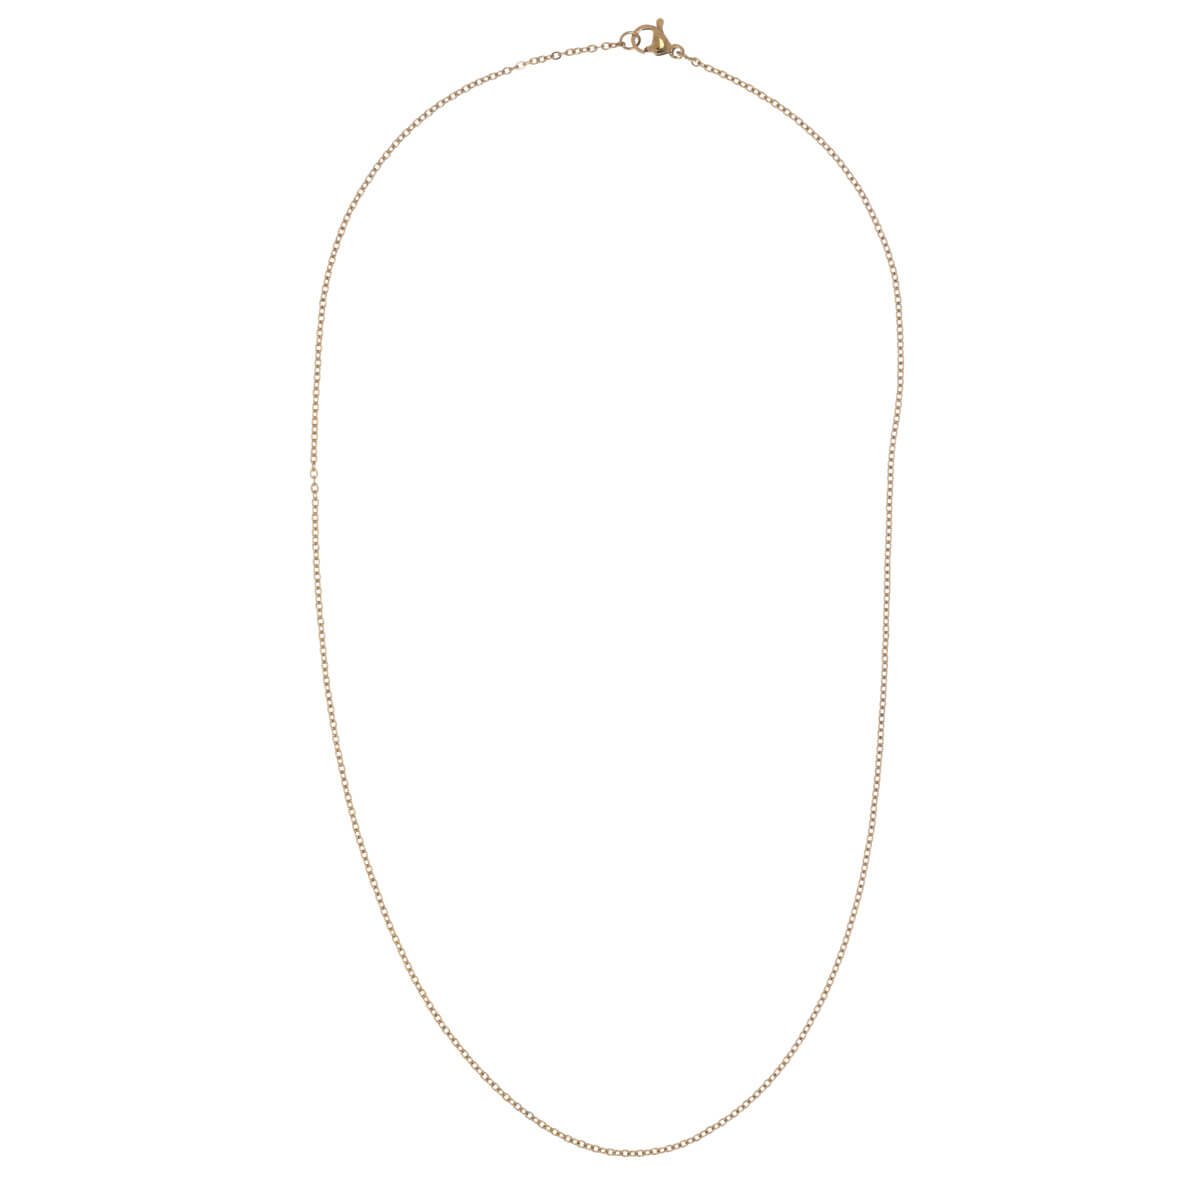 Thin gold plated necklace 44cm (Steel 316L)